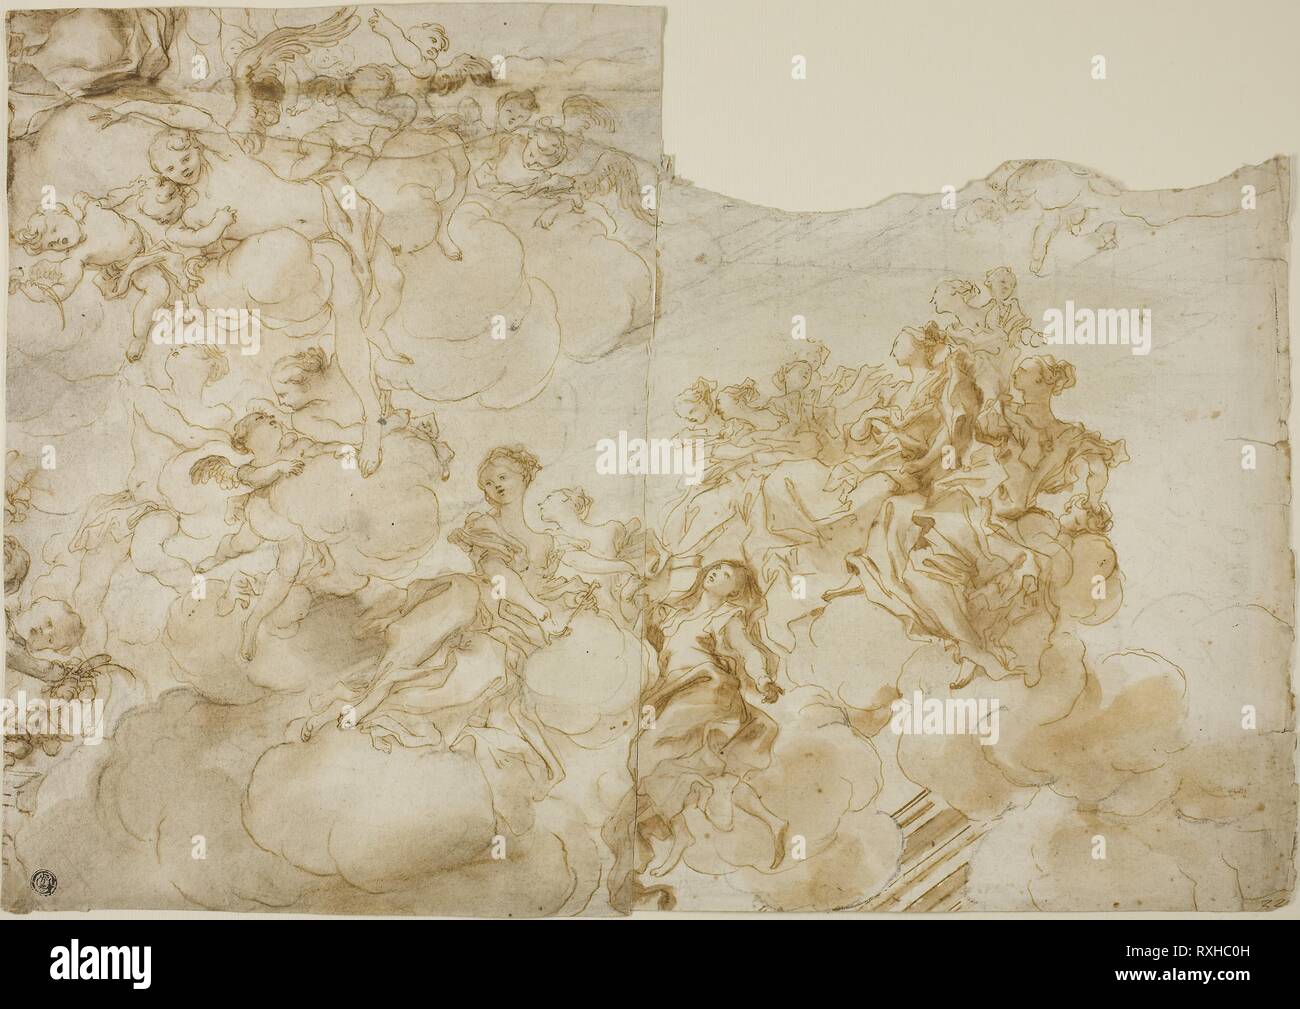 Female Figures with Putti in Clouds. Possibly Gregorio de' Ferrari (Italian, 1644-1726); or Domenico Piola (Italian, 1627-1703); or Antonio Allegri, called Correggio (Italian, c. 1489-1534); or Franz Anton Maulbertsch (Austrian, 1724-1796). Date: 1714-1726. Dimensions: 357 x 505 mm. Pen and brown ink, with brush and brown wash and black chalk, on ivory laid paper. Origin: Italy. Museum: The Chicago Art Institute. Stock Photo